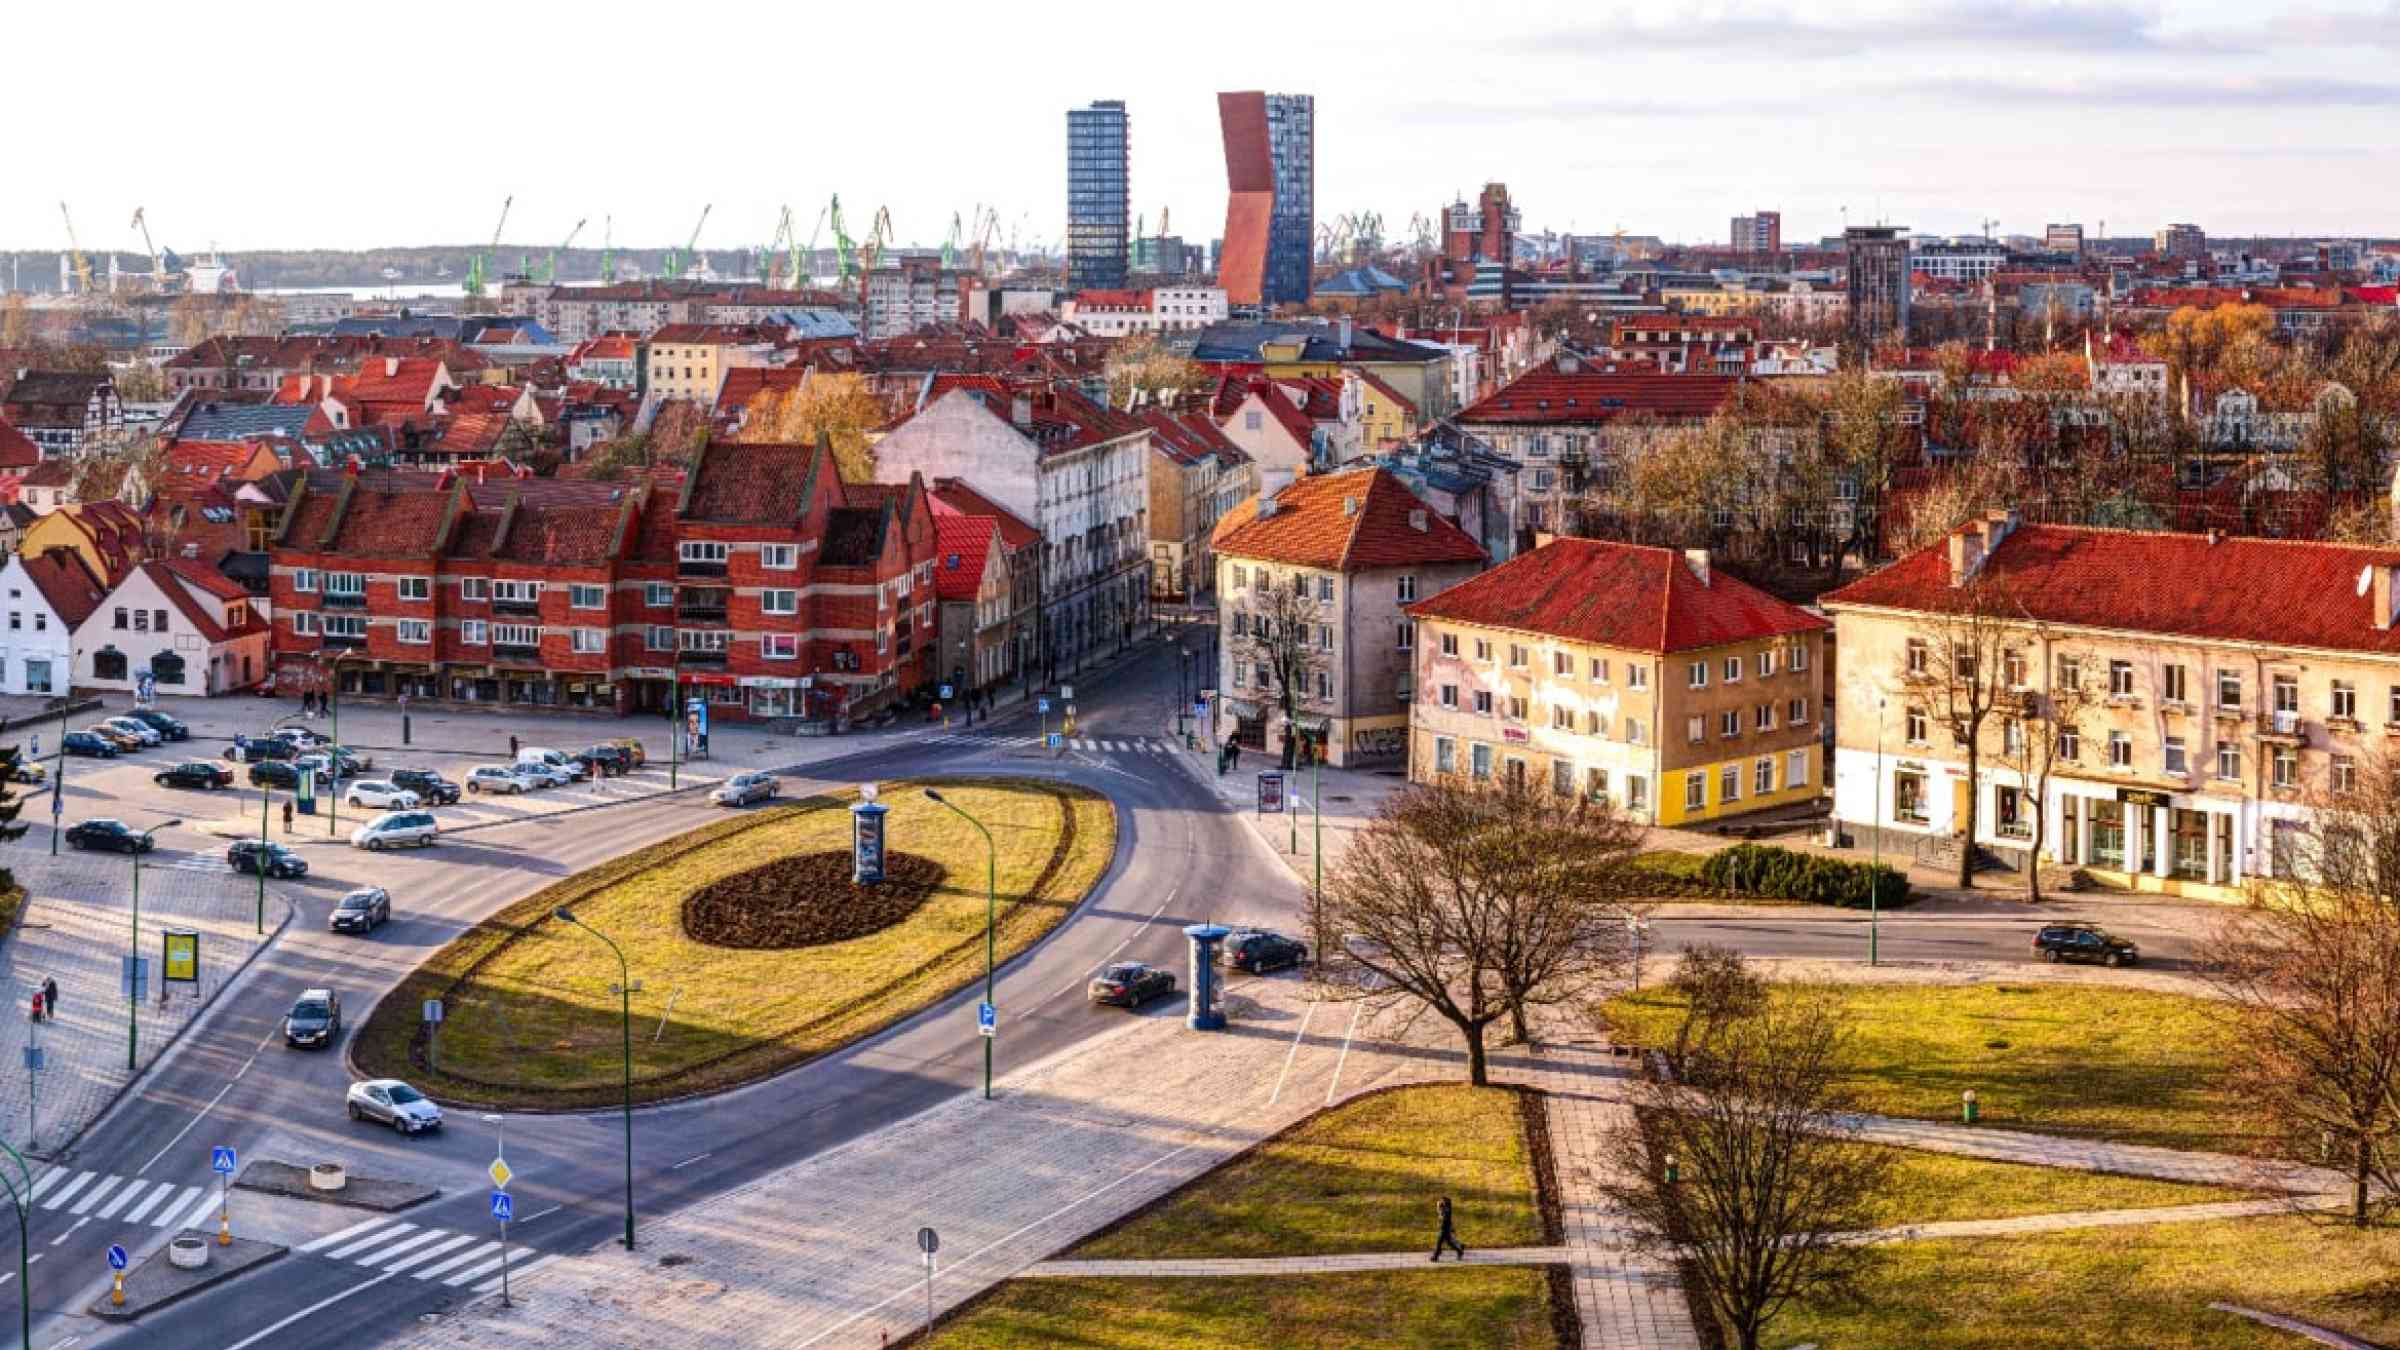 Aerial view of the old town in Klaipeda, Lithuania